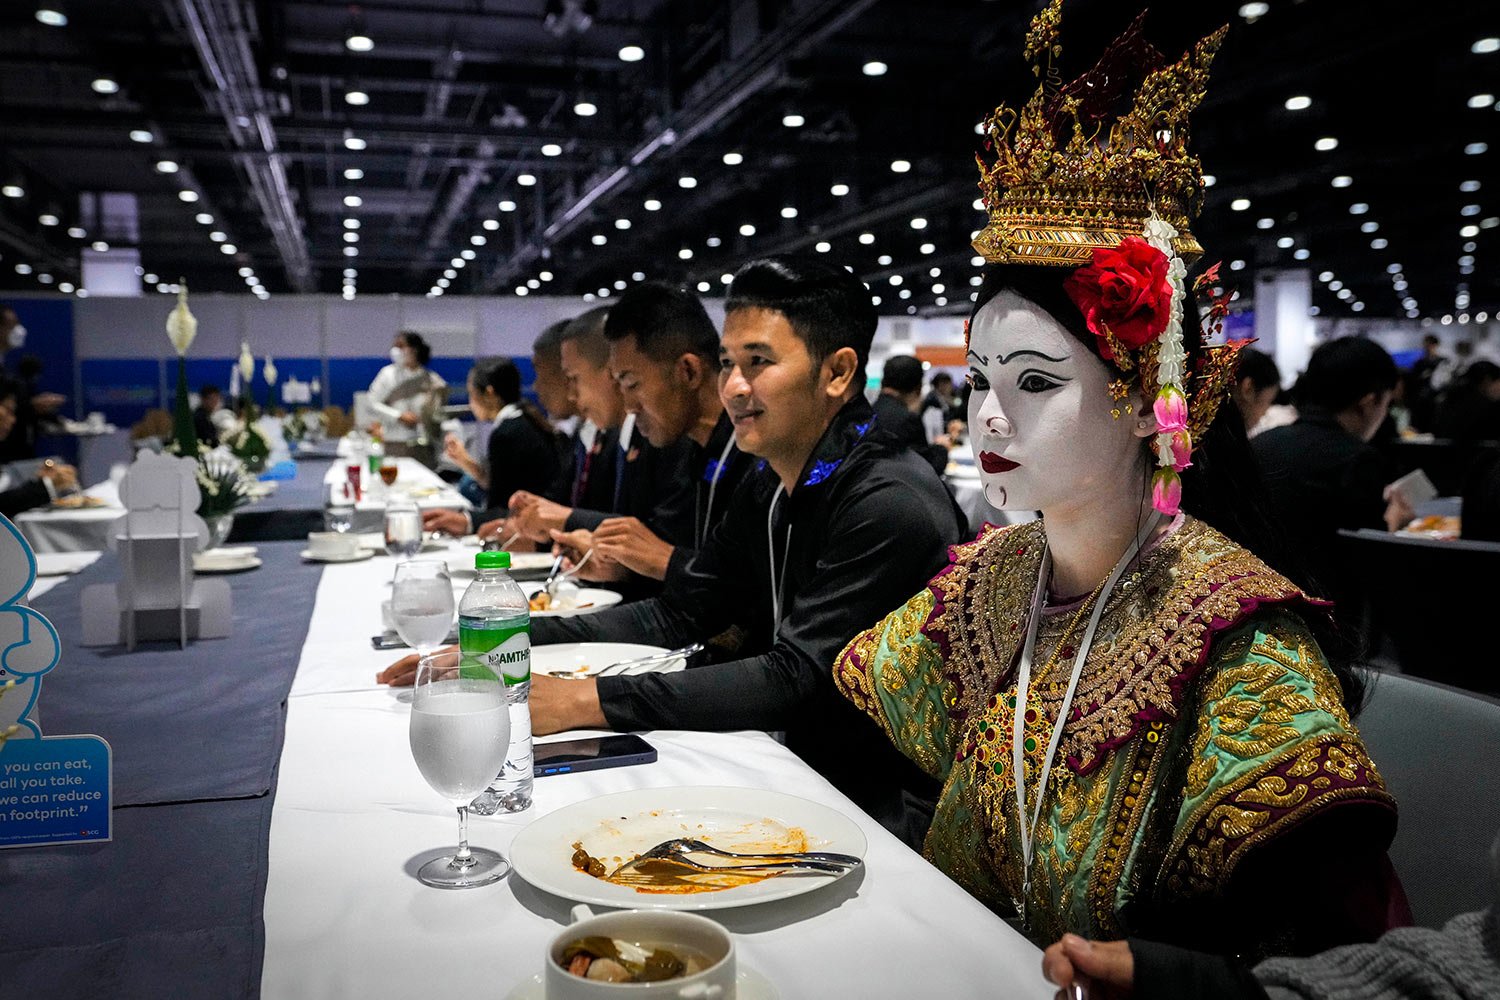  A Thai traditional dancer in costume finishes her lunch at the Asia-Pacific Economic Cooperation APEC summit, Thursday, Nov. 17, 2022, in Bangkok, Thailand. (AP Photo/Anupam Nath) 